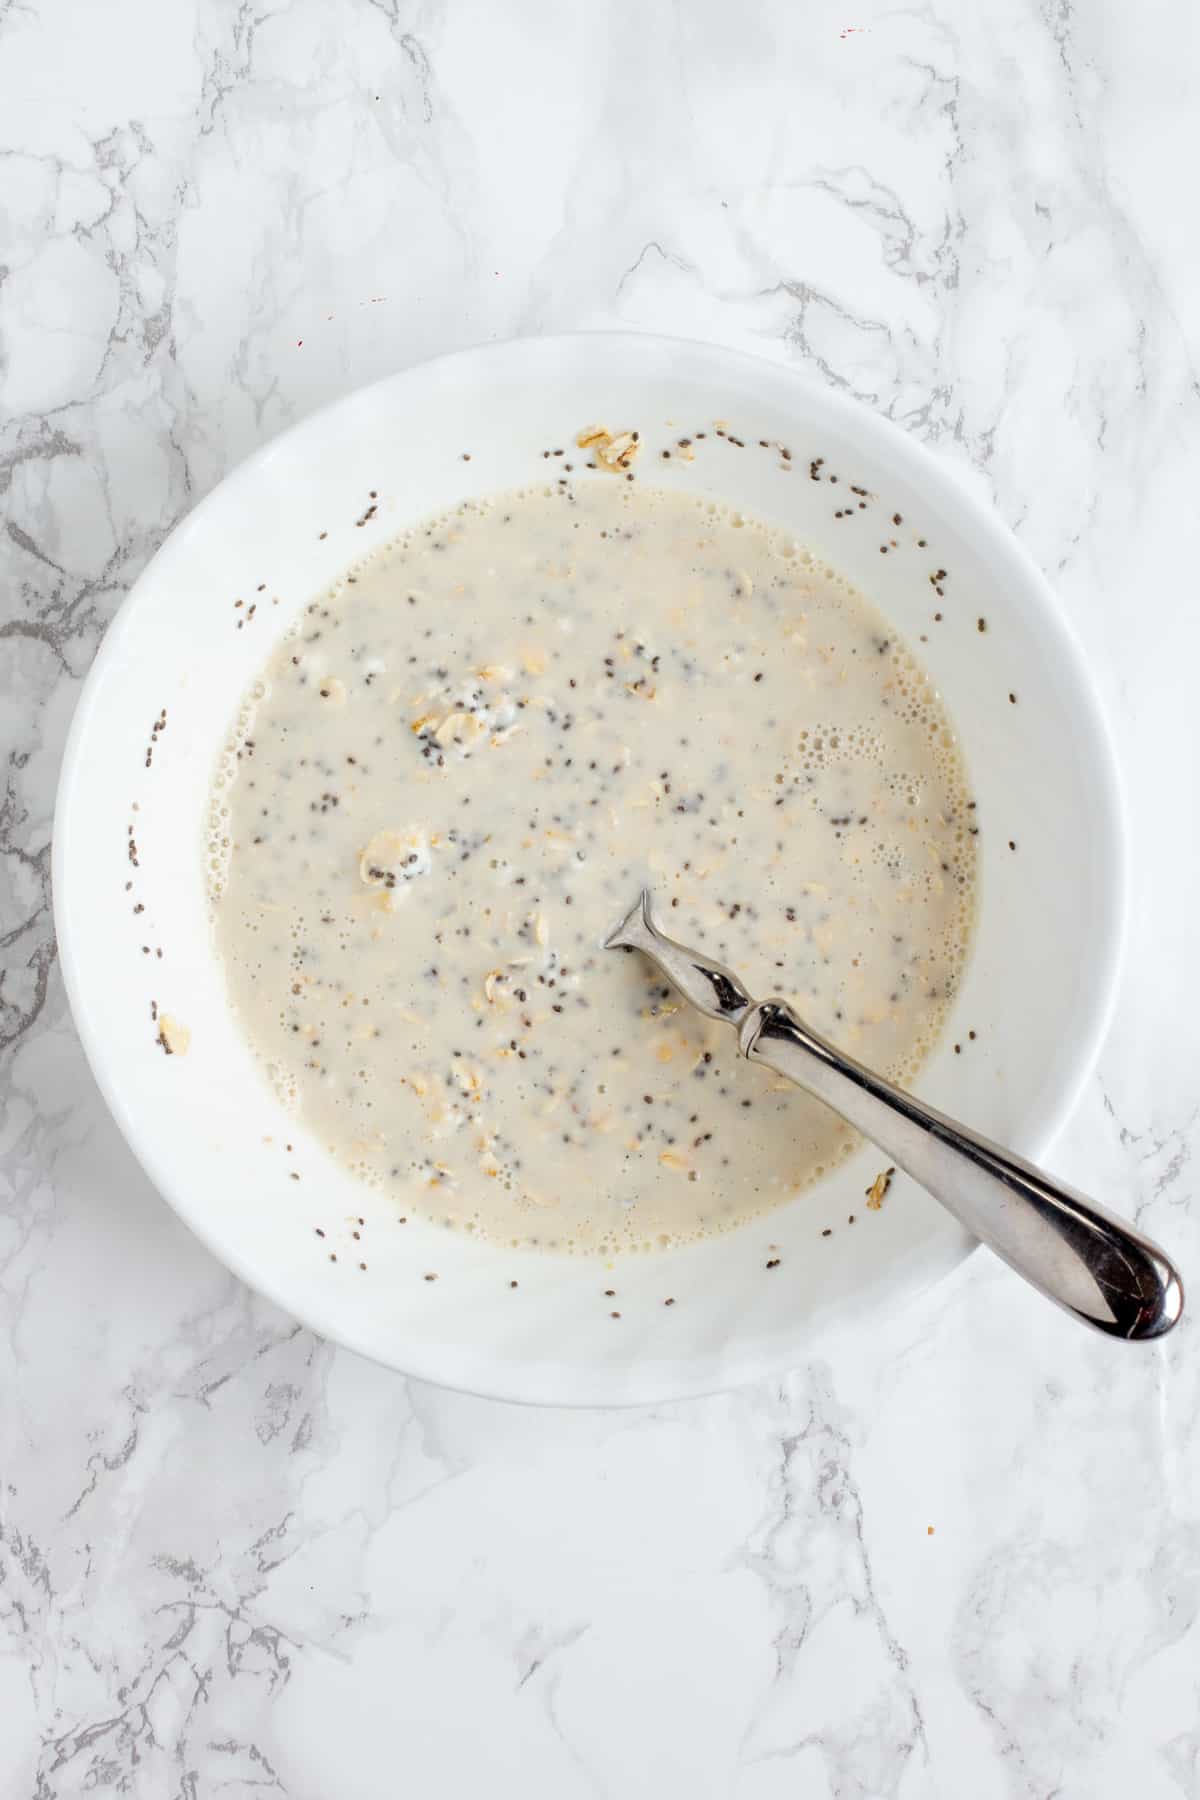 Stirring together the ingredients for overnight oats in a small white mixing bowl with a spoon. The mixing bowl in on a gray marble countertop.